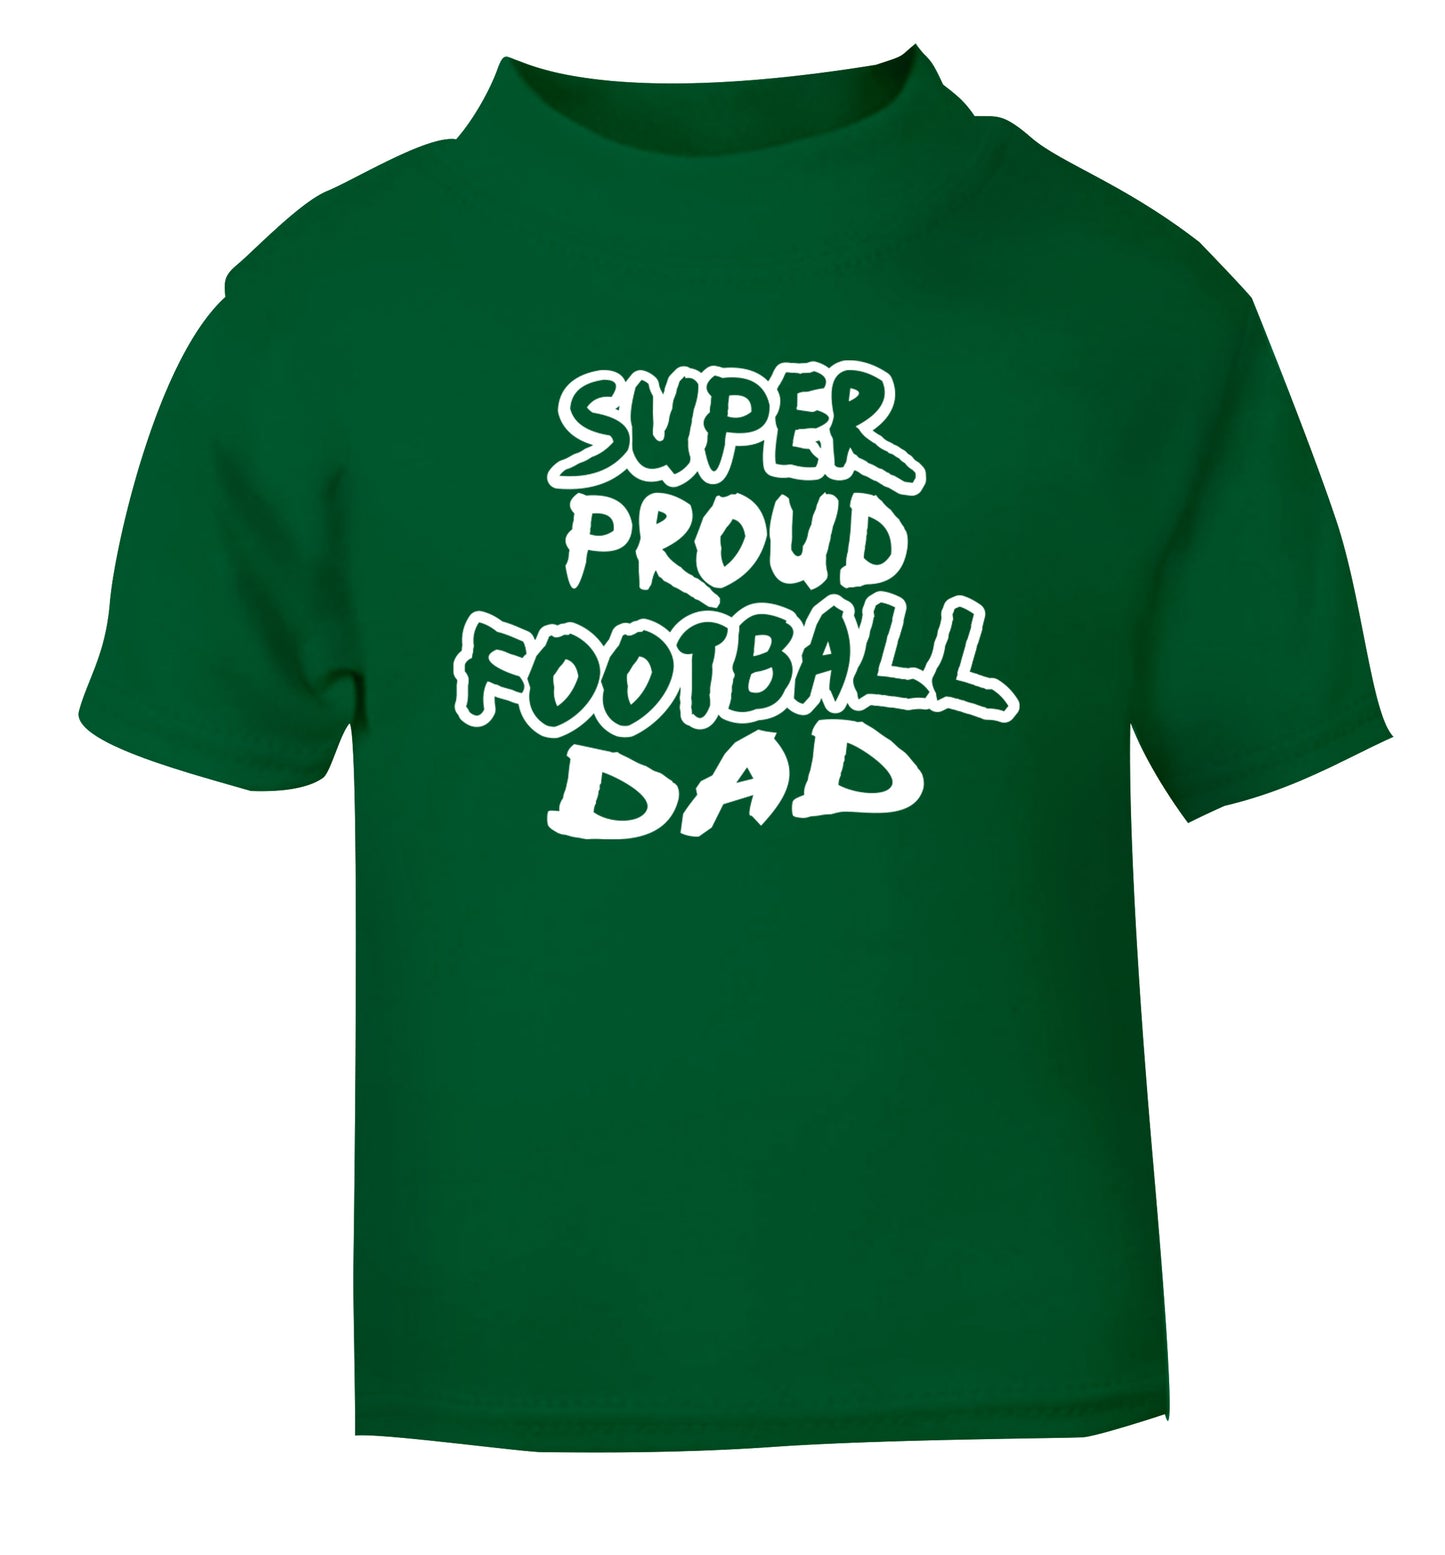 Super proud football dad green Baby Toddler Tshirt 2 Years